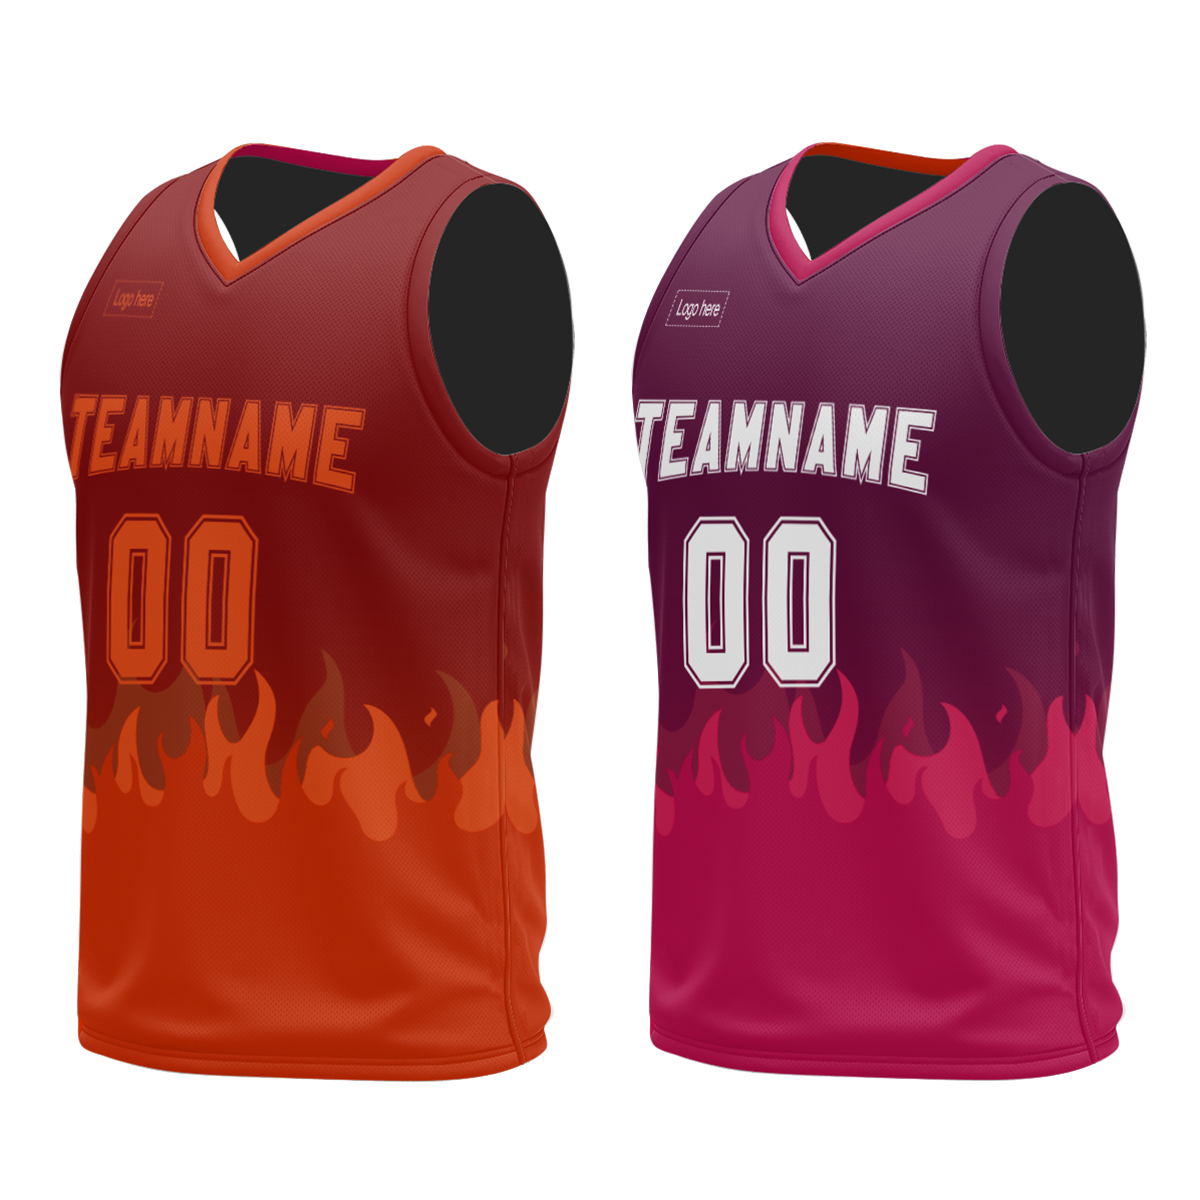 wholesale-new-blank-team-basketball-jerseys-printing-design-your-own-basketball-uniforms-for-men-and-women-at-cj-pod-5